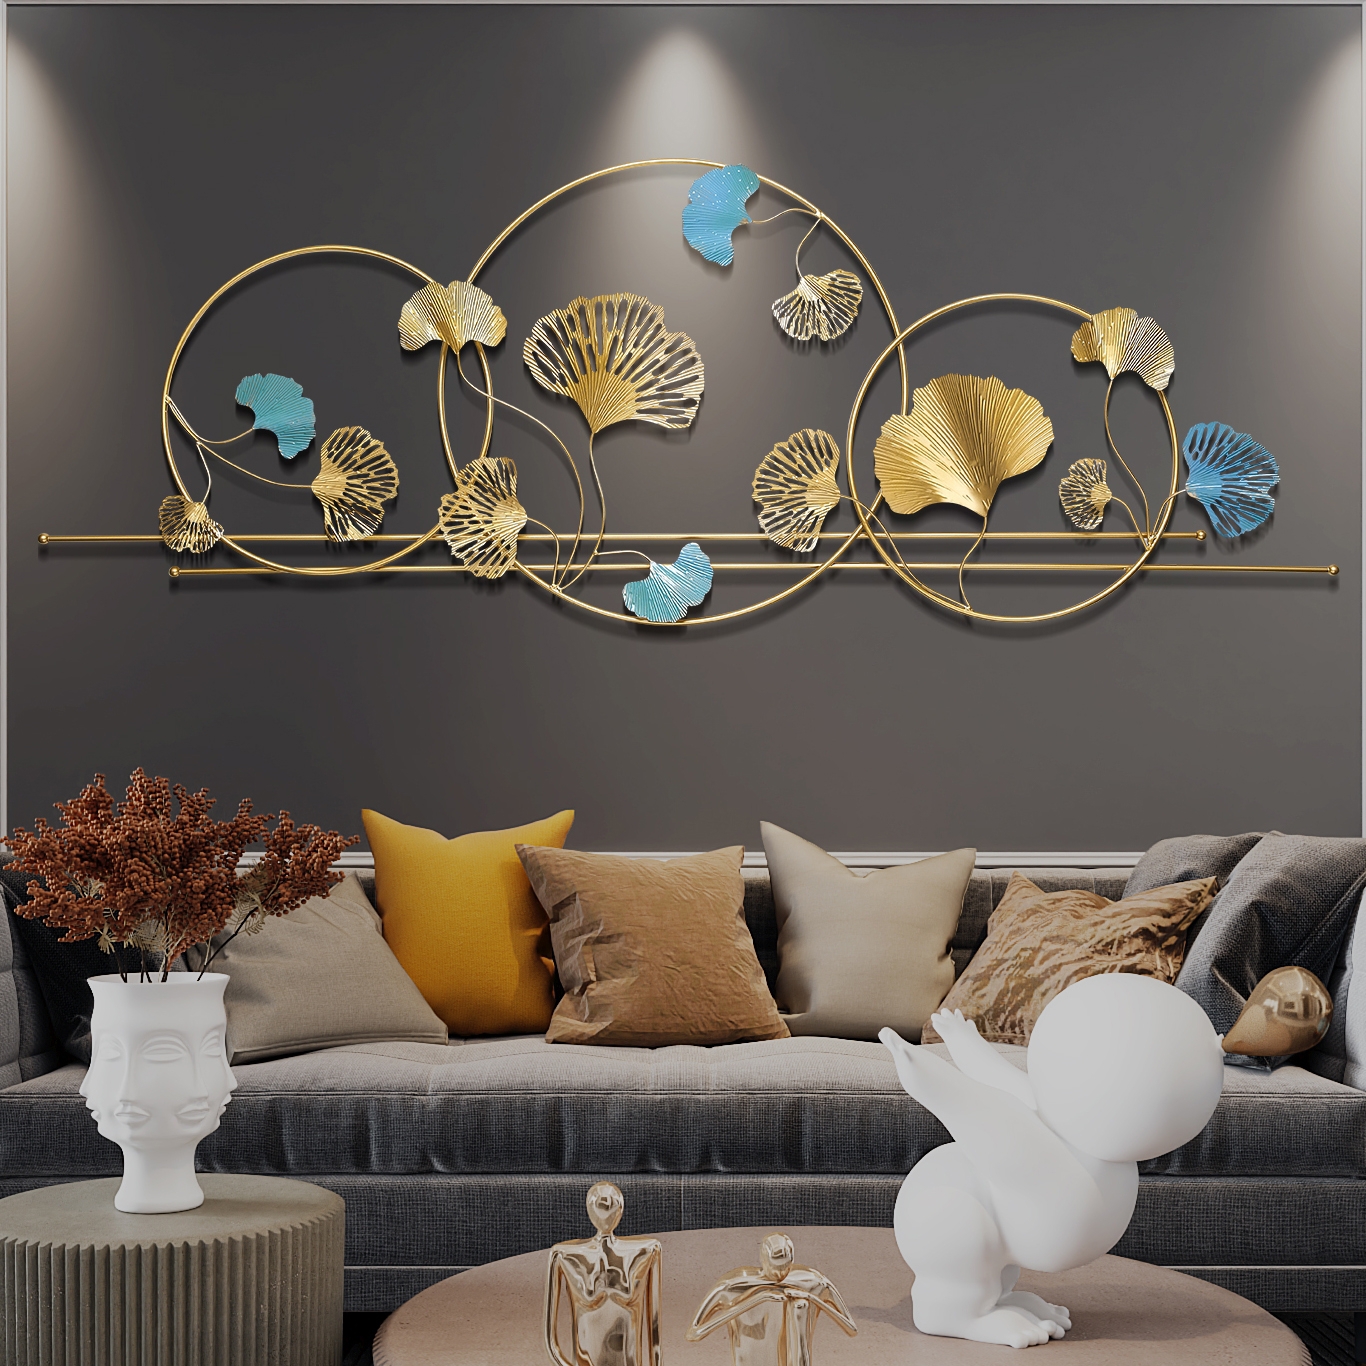 New Chinese style light luxury wrought iron wall decoration living room metal background wall pendant porch wall decorat